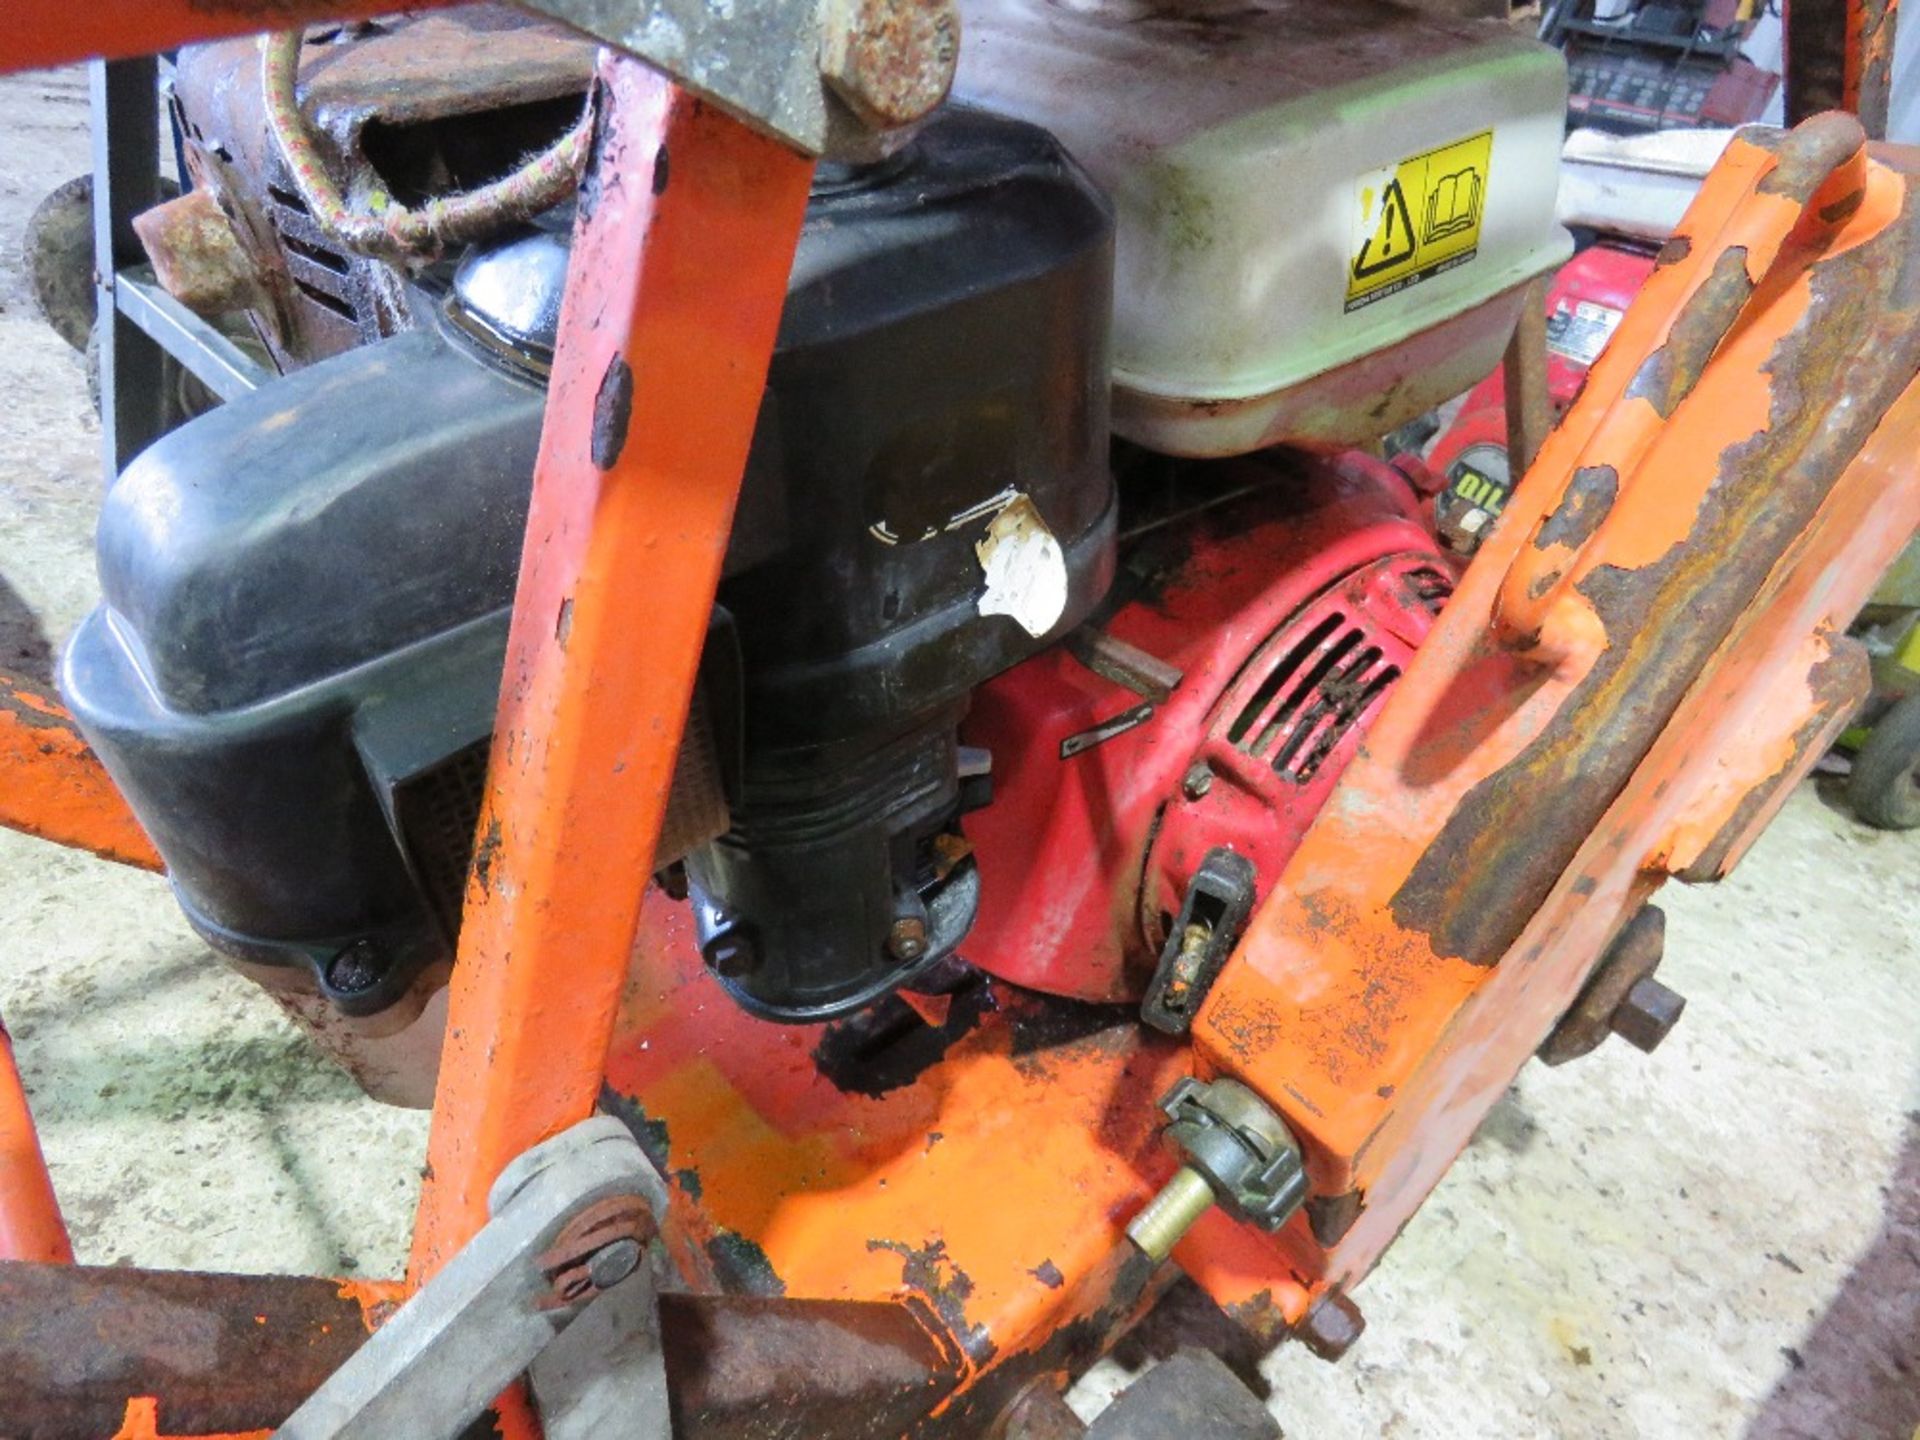 REDBAND FLOOR SAW WITH BLADE AND WATER TANK....SOURCED FROM DEPOT CLOSURE. - Image 5 of 6